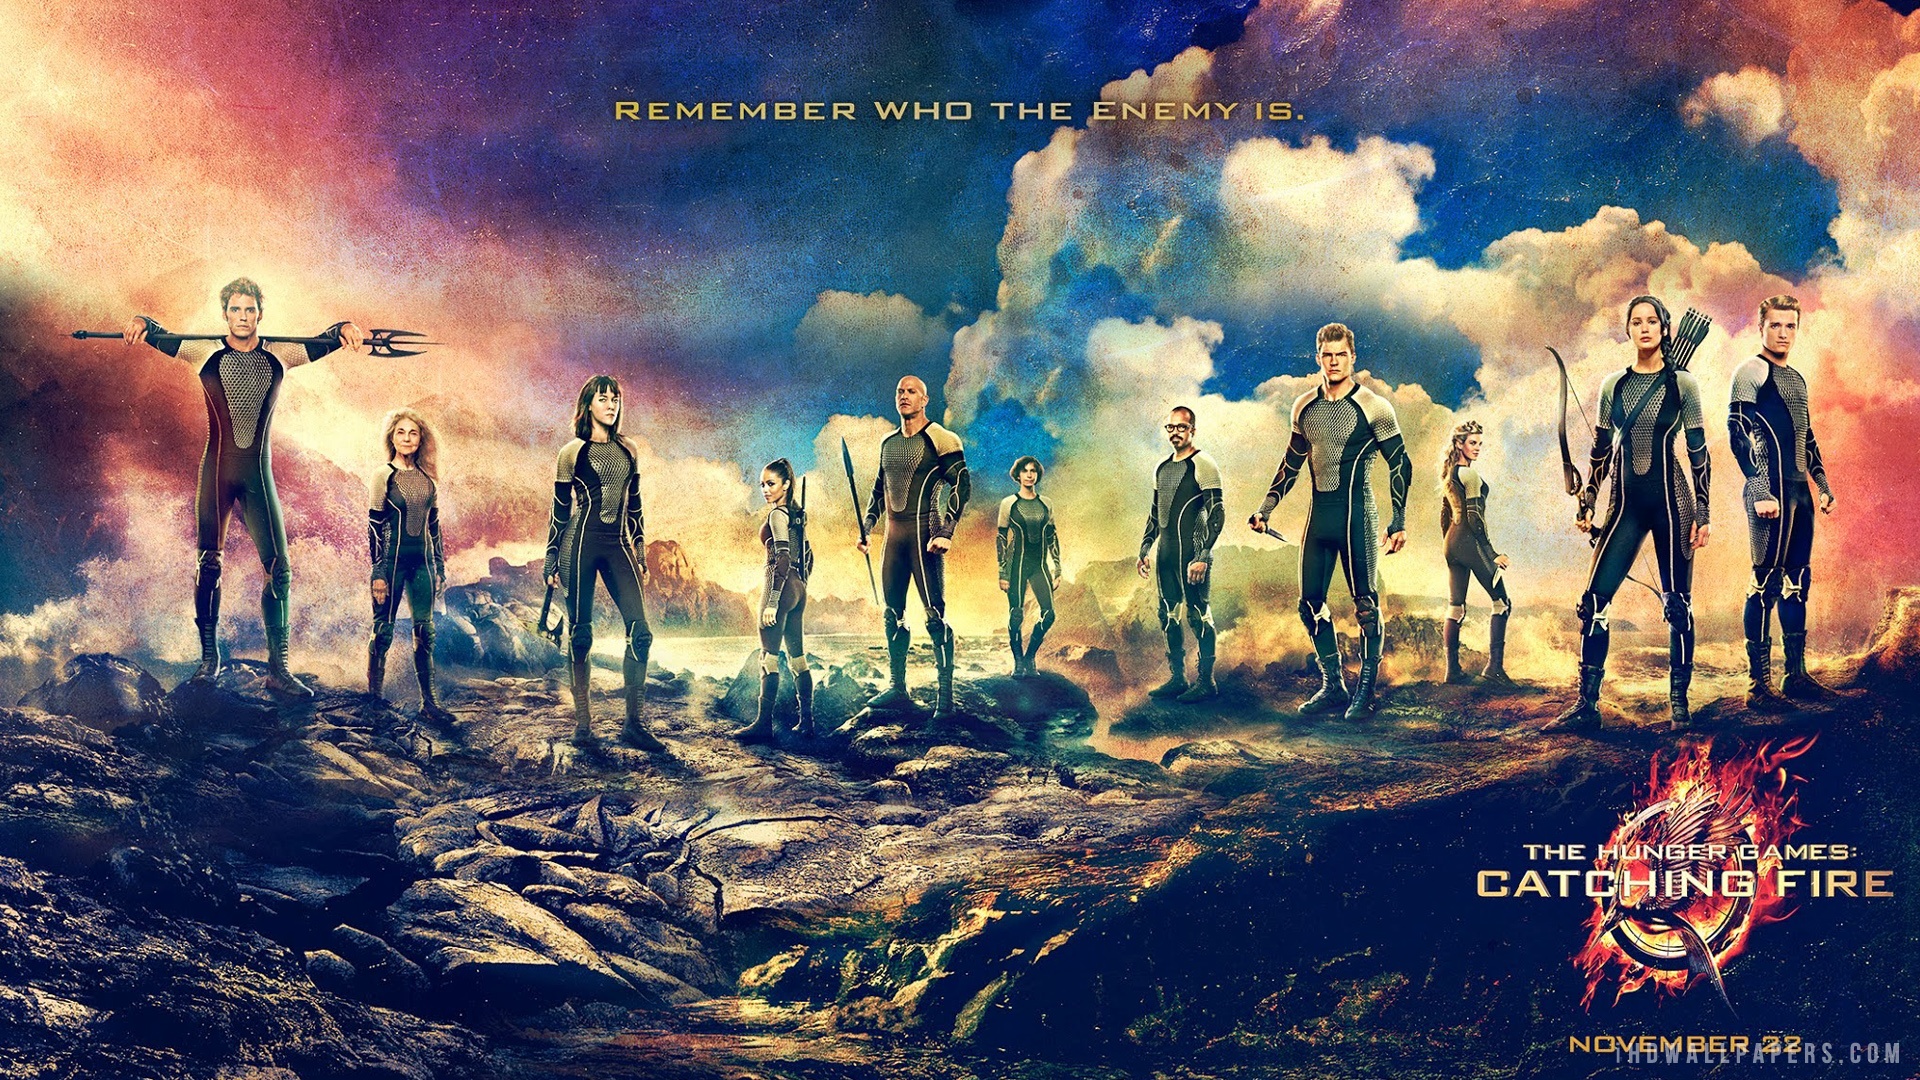 Download 2013 The Hunger Games Catching Fire wallpaper from the